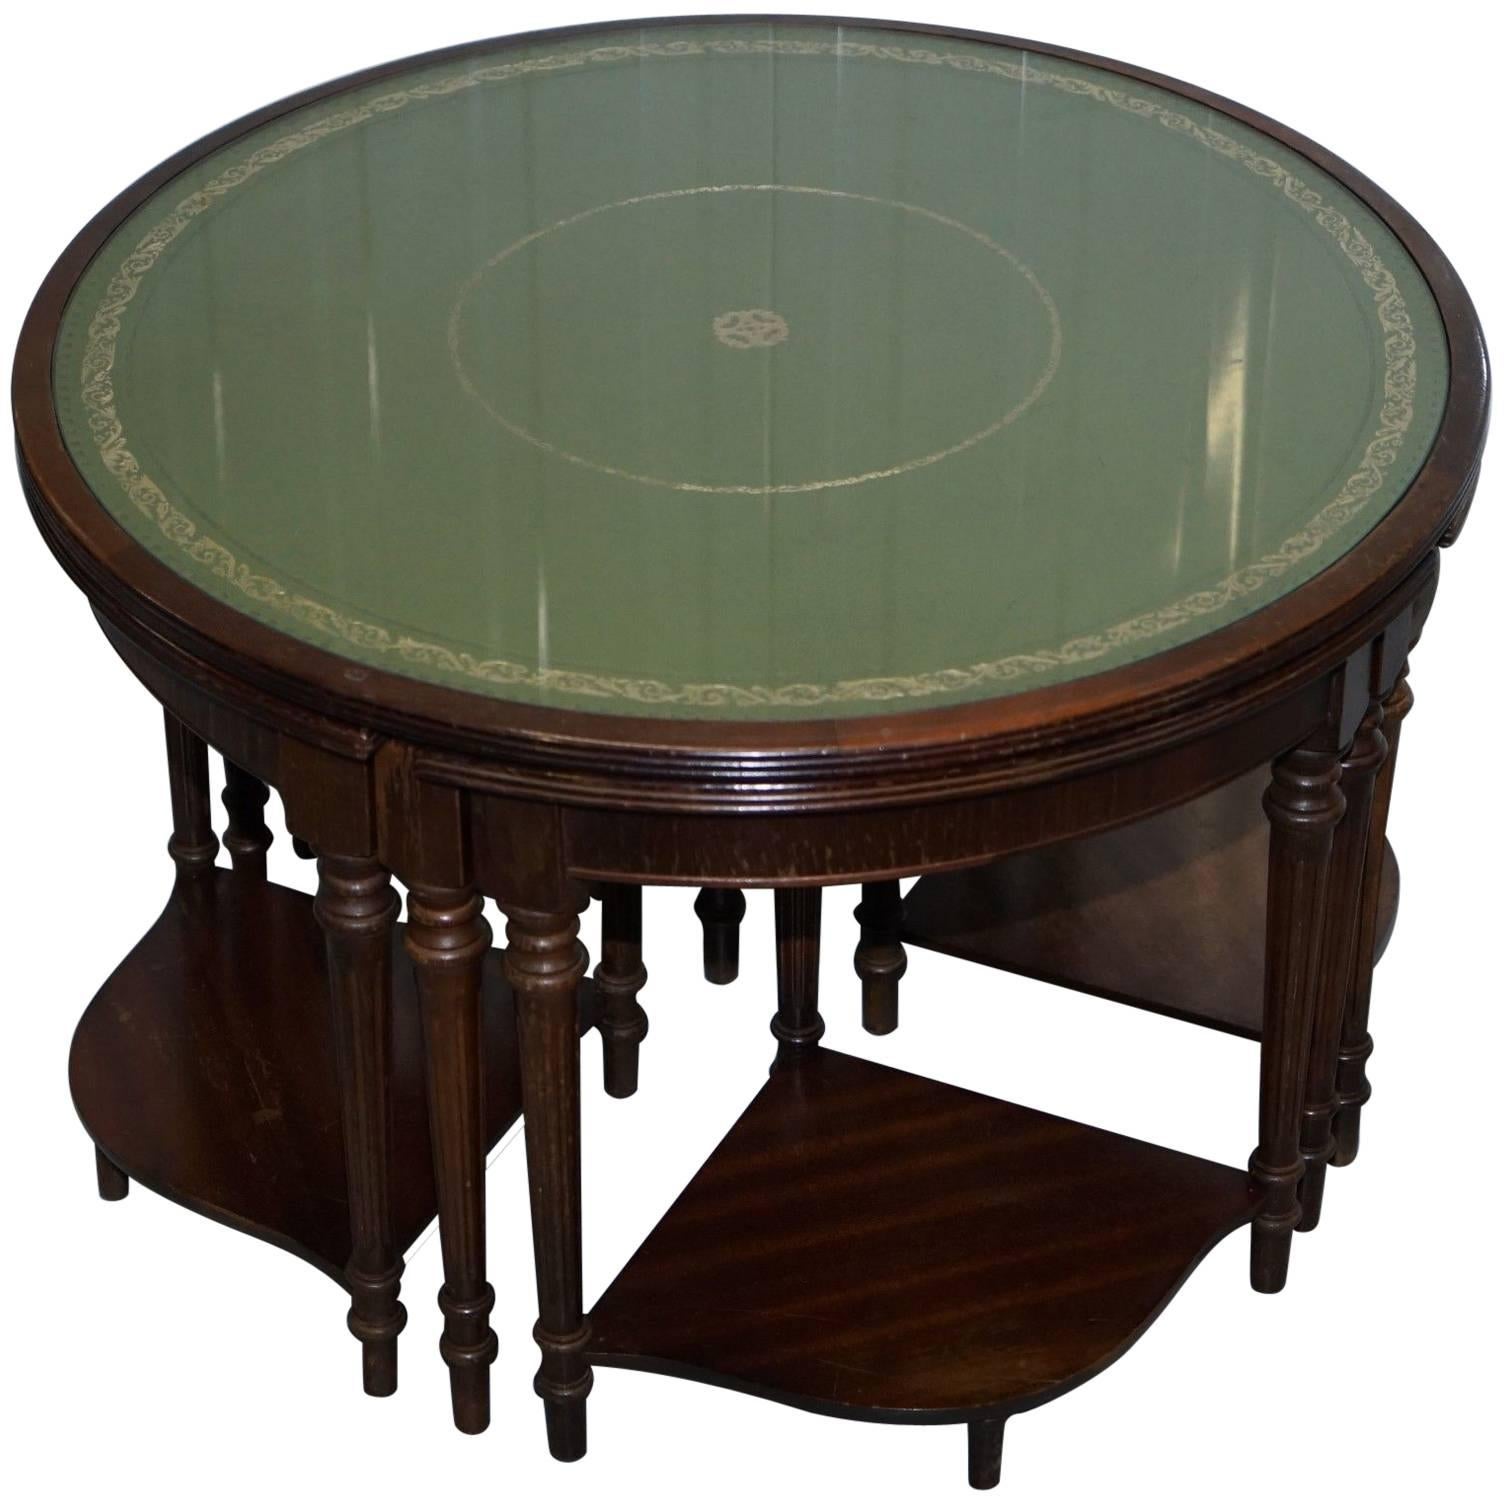 Lovely Regency Style Drum Coffee Table with Nested Tables under Green Leather